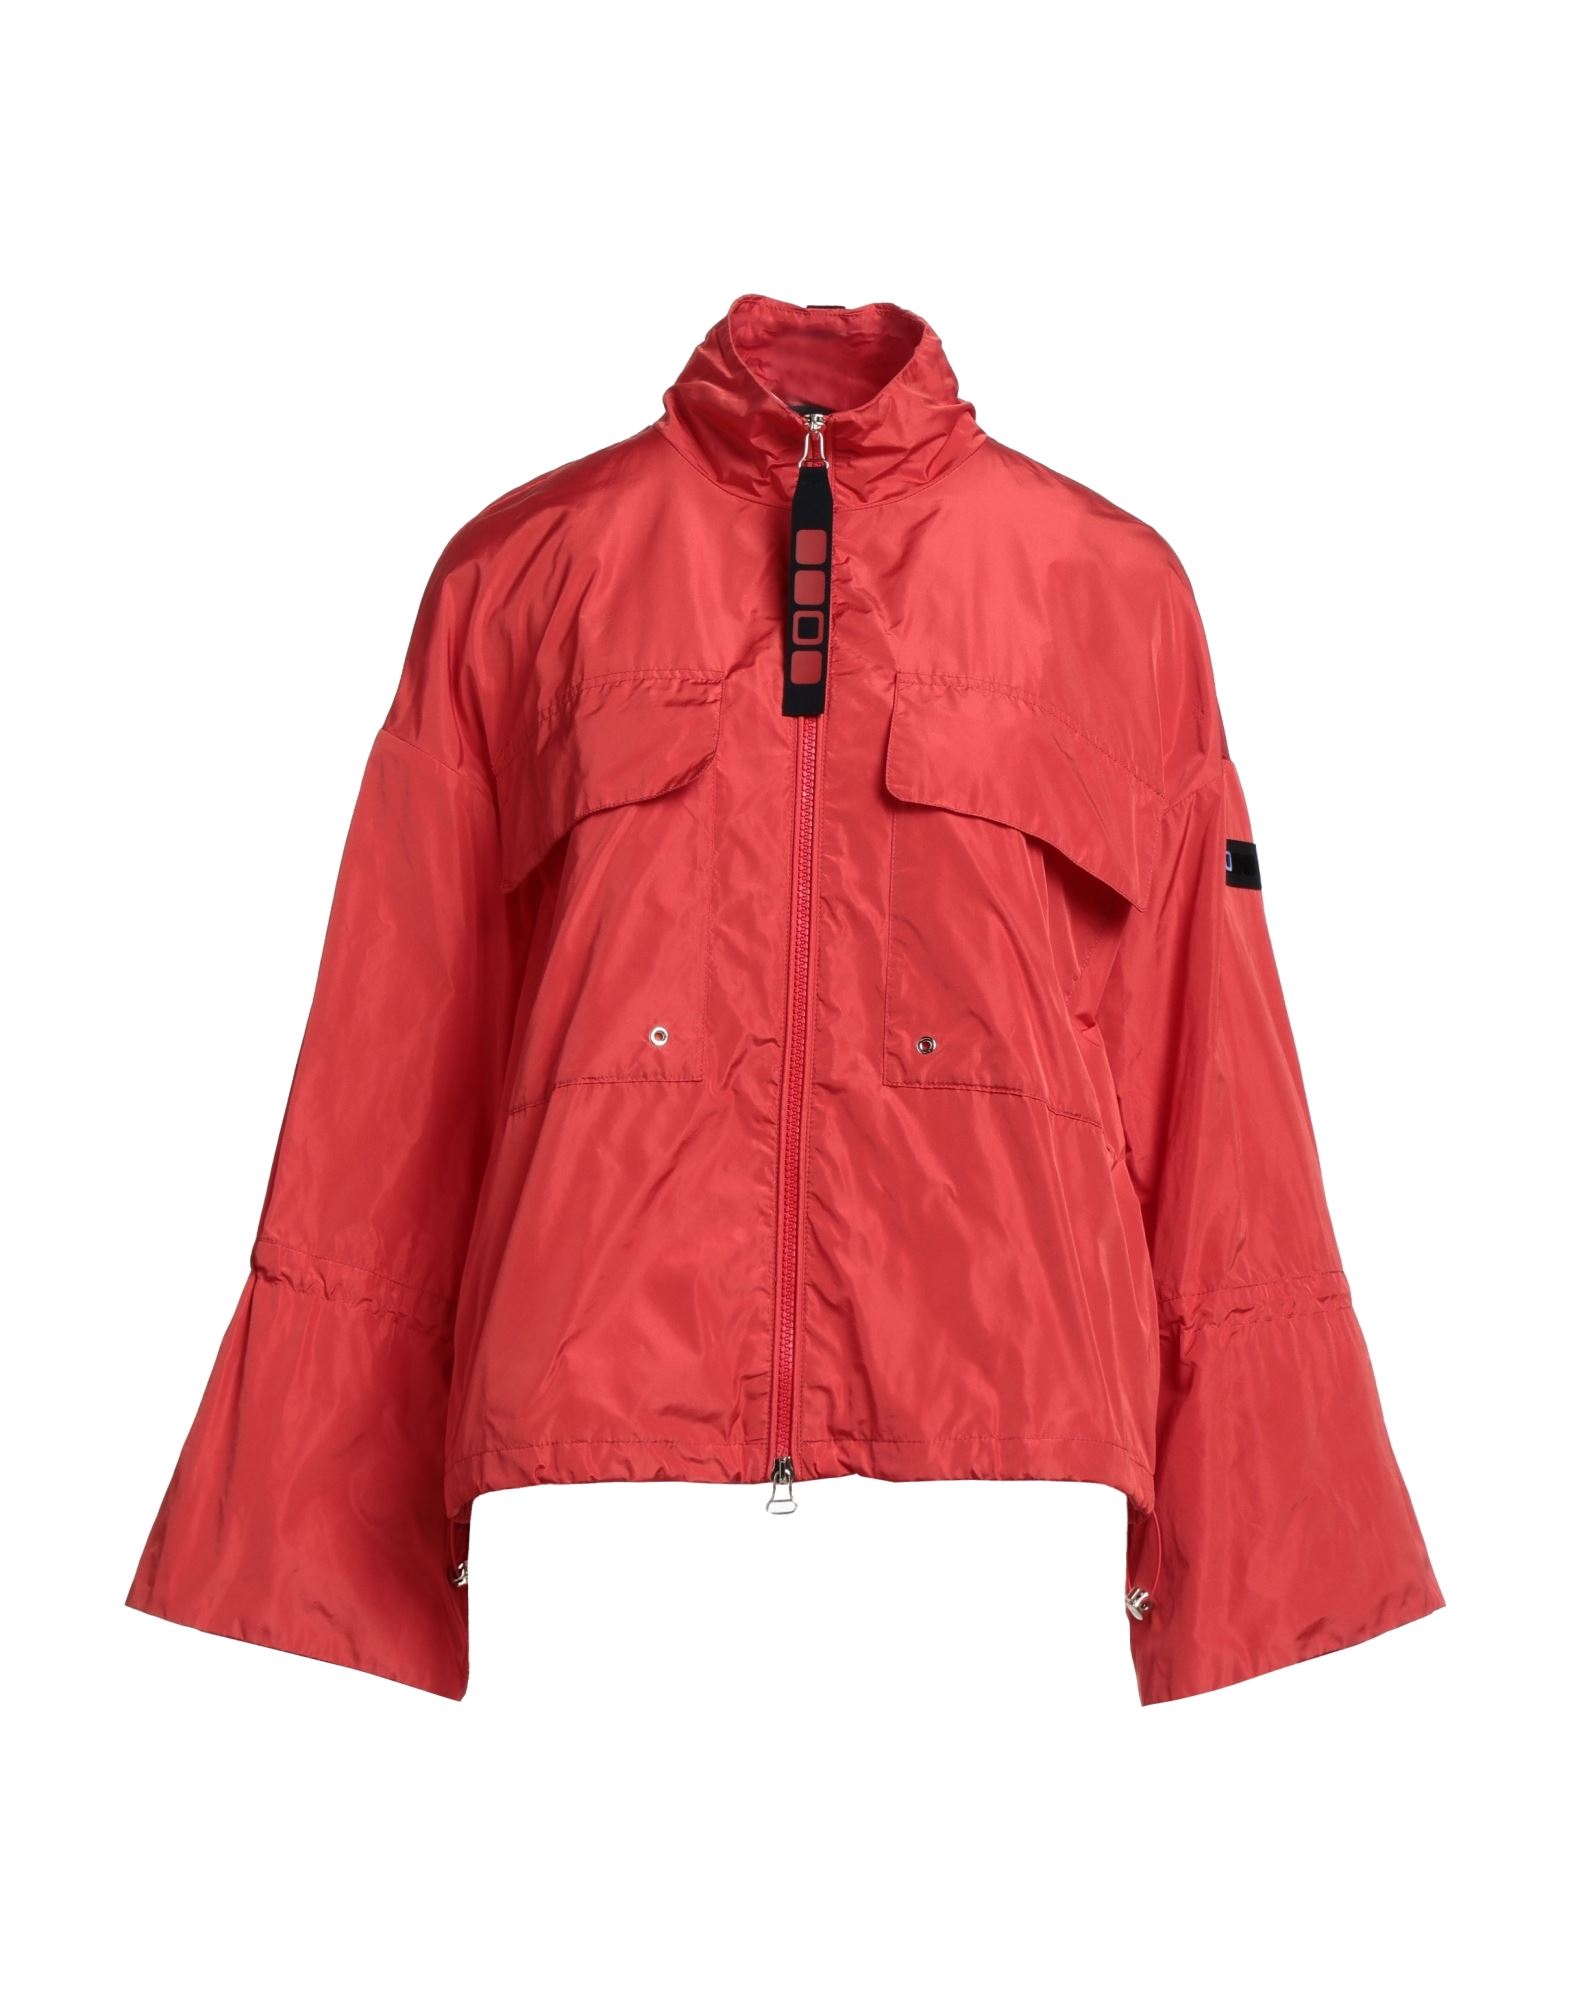 UP TO BE Jacke, Mantel & Trenchcoat Damen Rot von UP TO BE